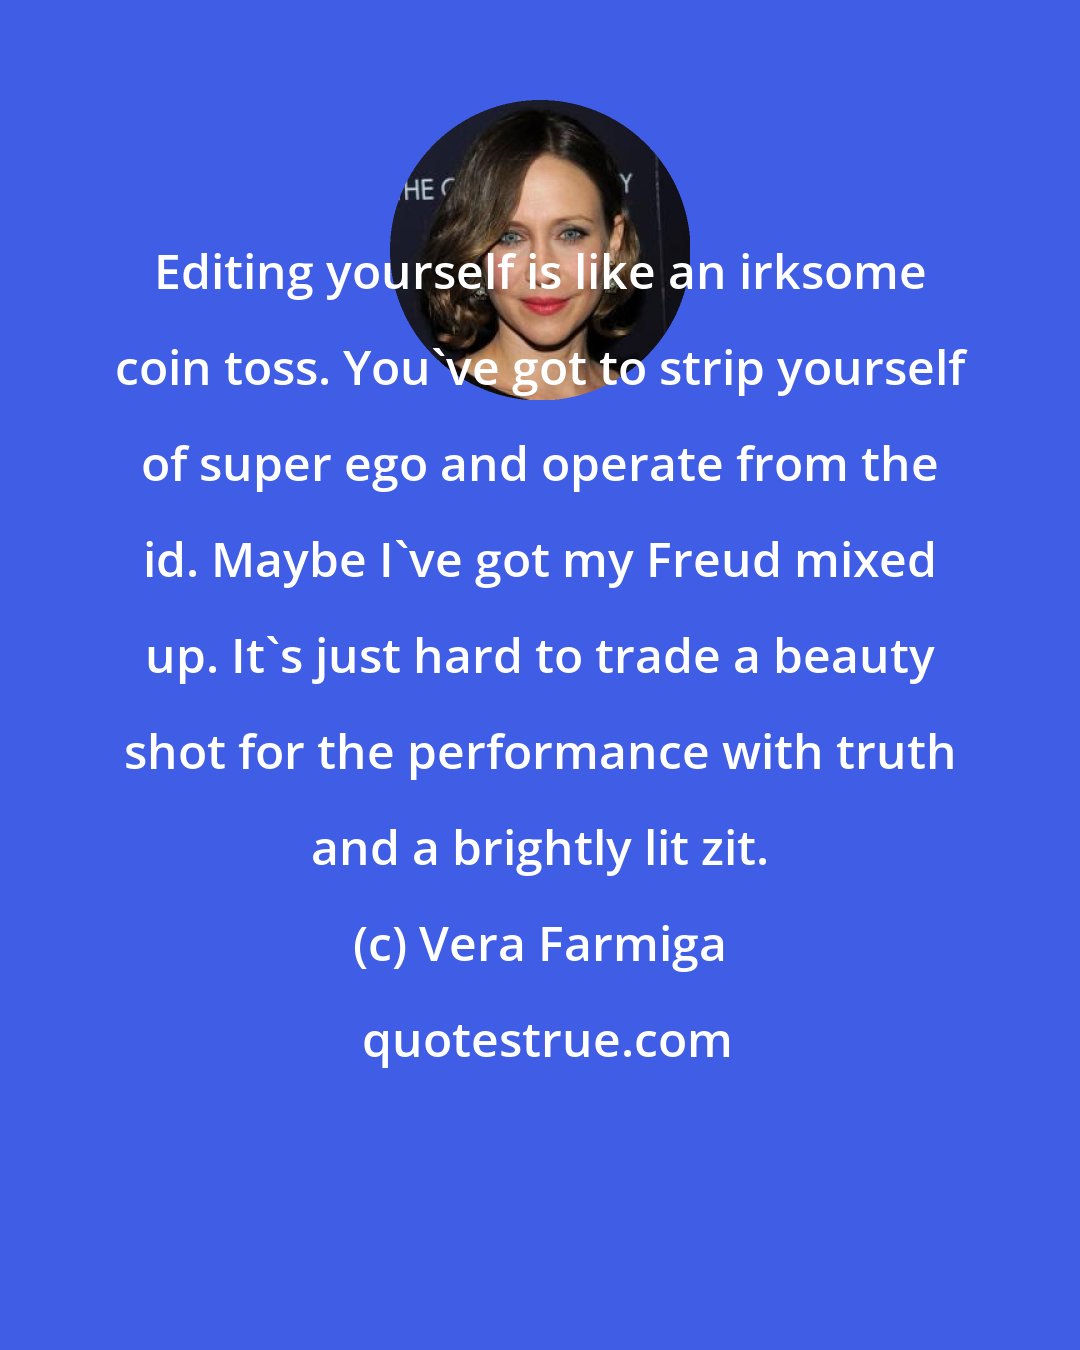 Vera Farmiga: Editing yourself is like an irksome coin toss. You've got to strip yourself of super ego and operate from the id. Maybe I've got my Freud mixed up. It's just hard to trade a beauty shot for the performance with truth and a brightly lit zit.